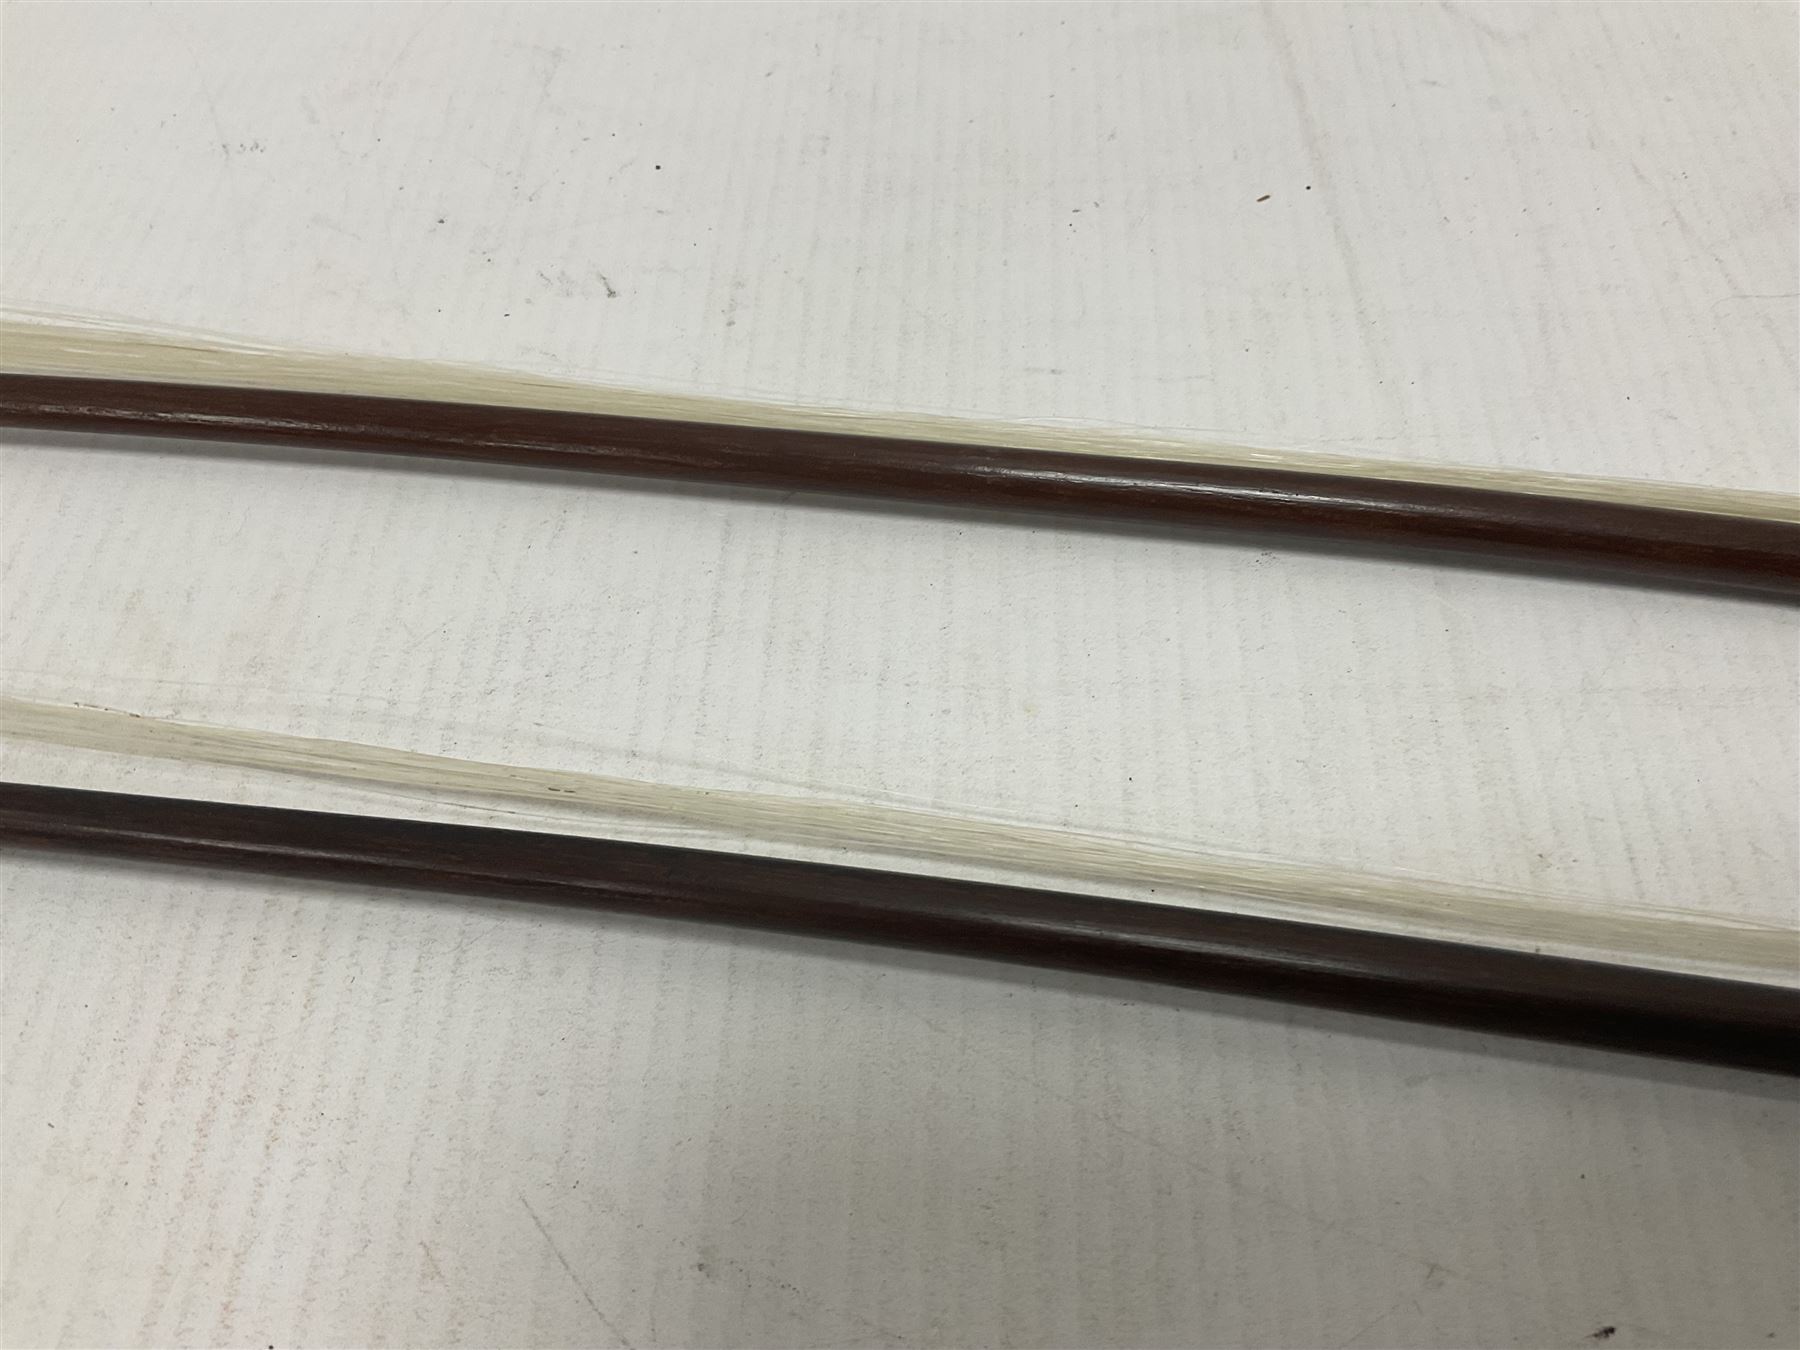 Two wooden violin bows - Image 11 of 12